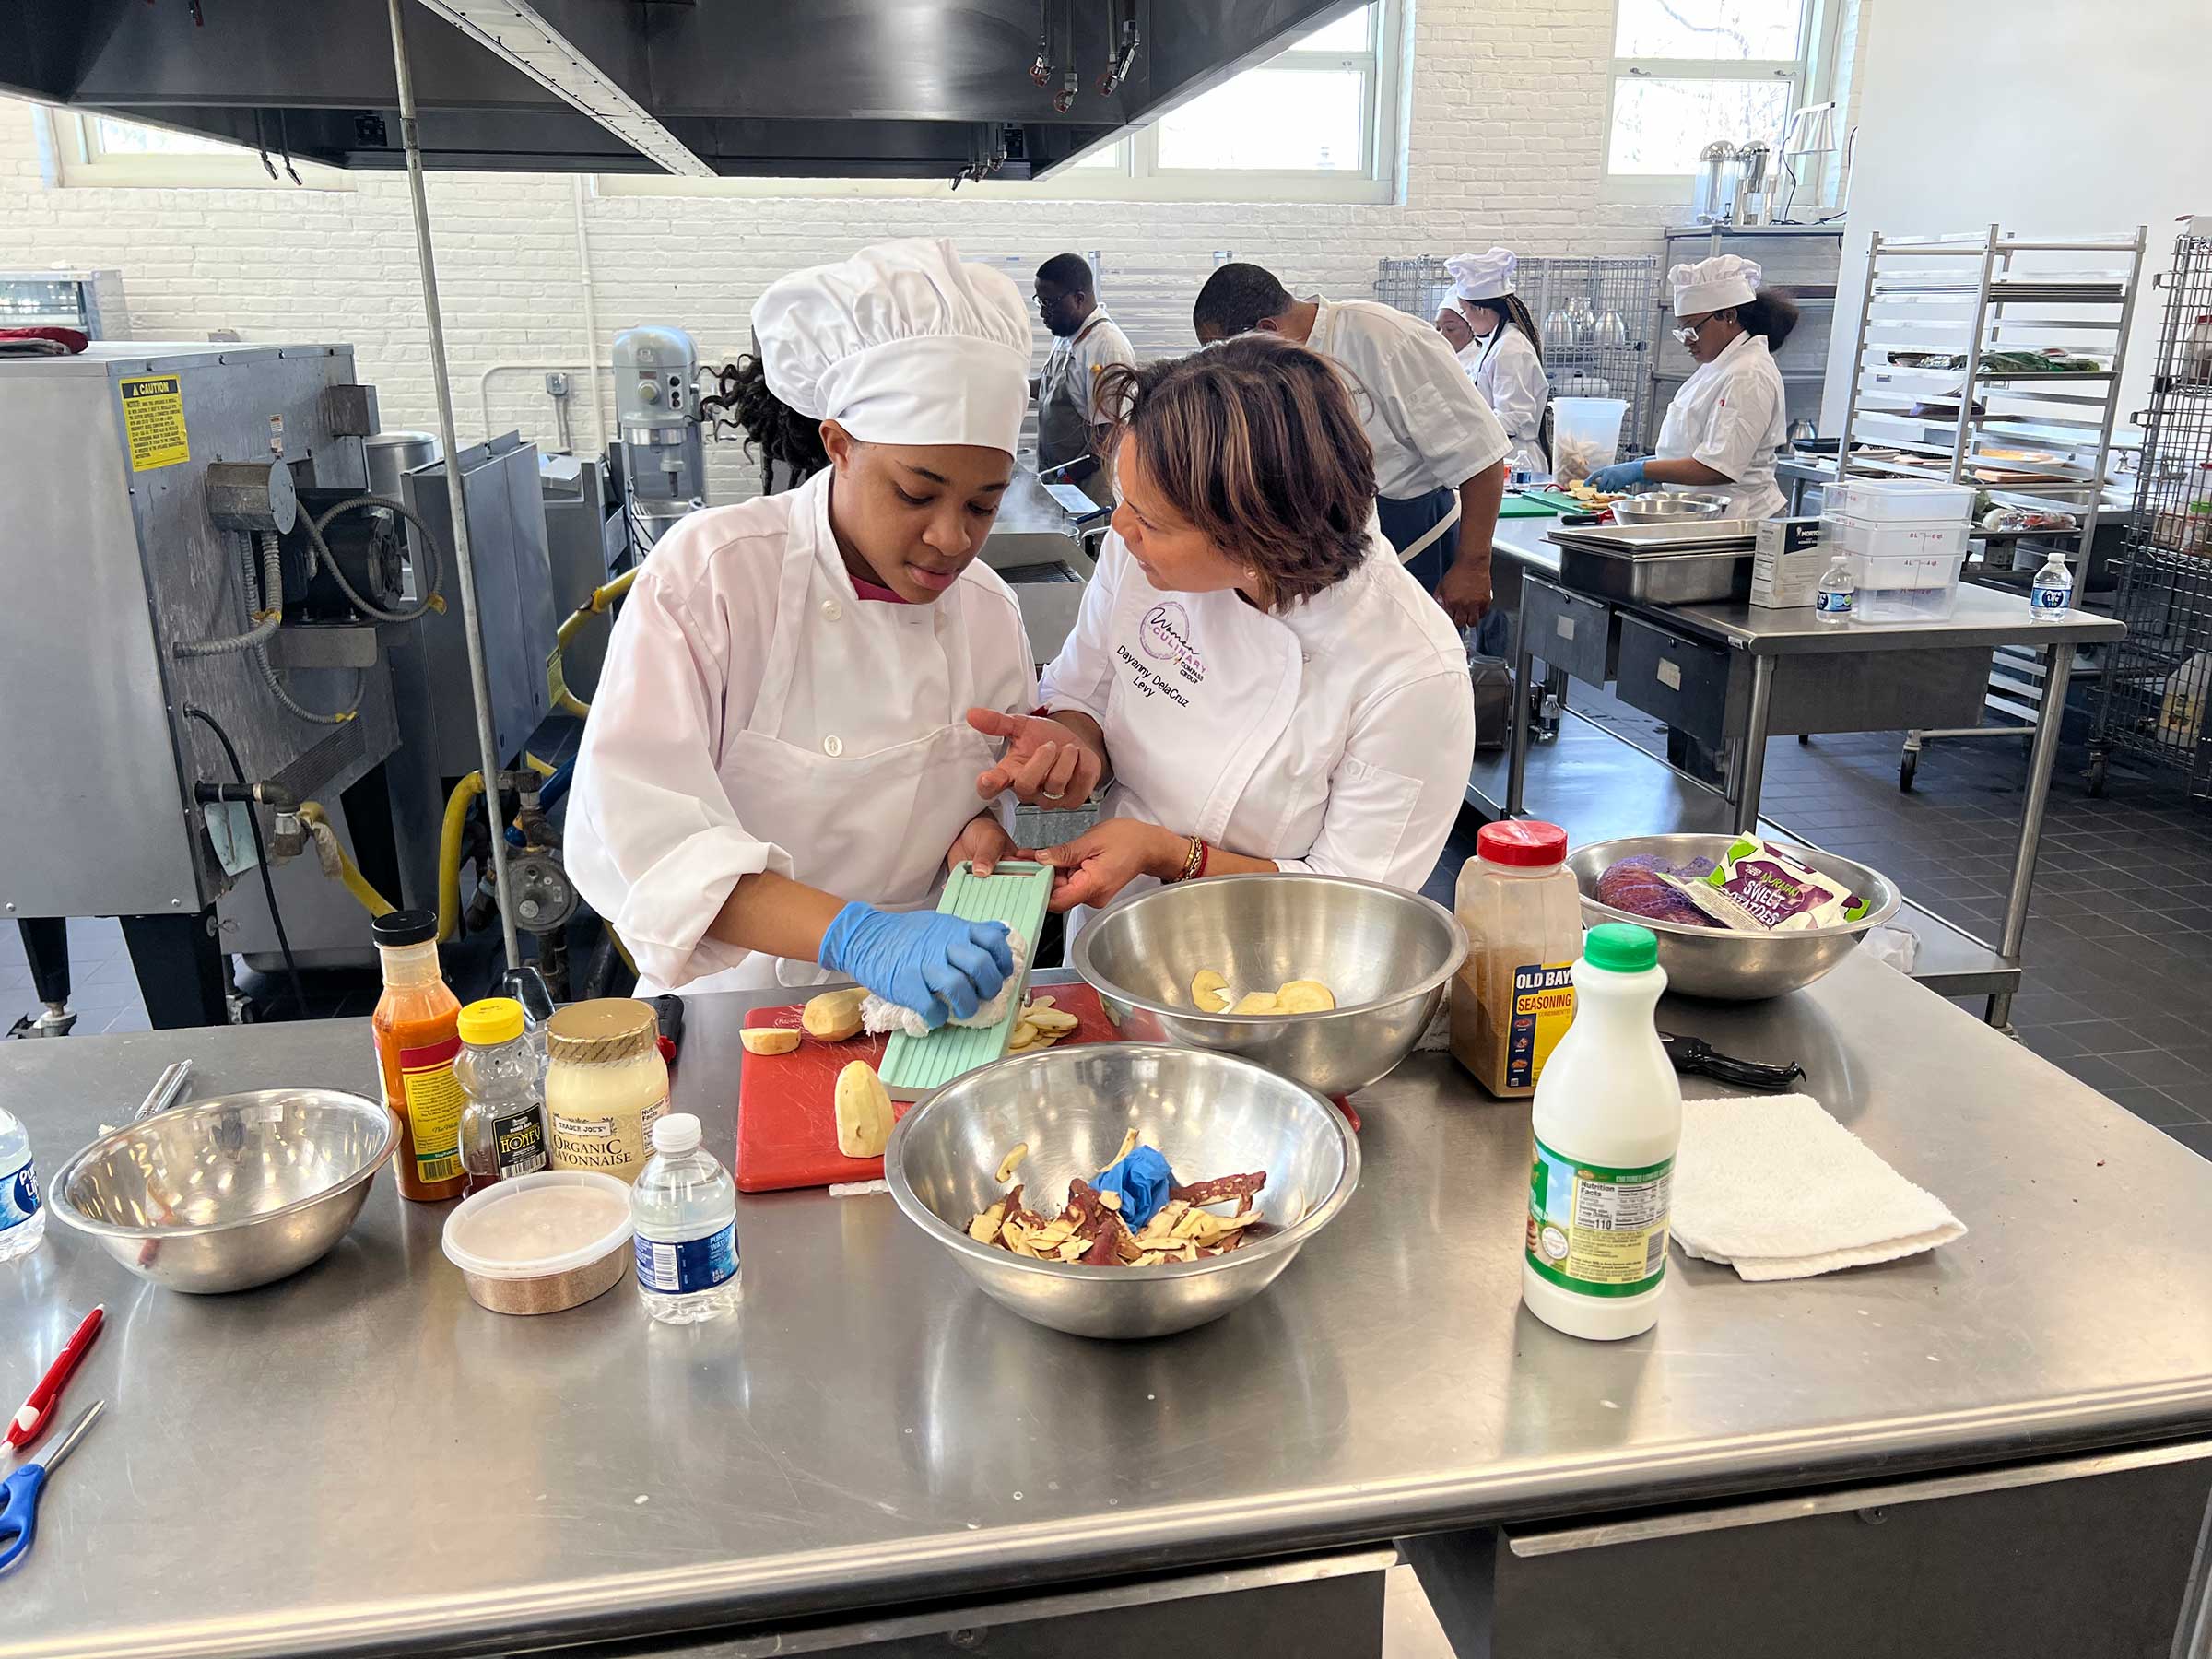 Chef Dayanny Delacruz showing a student how to properly use a mandoline